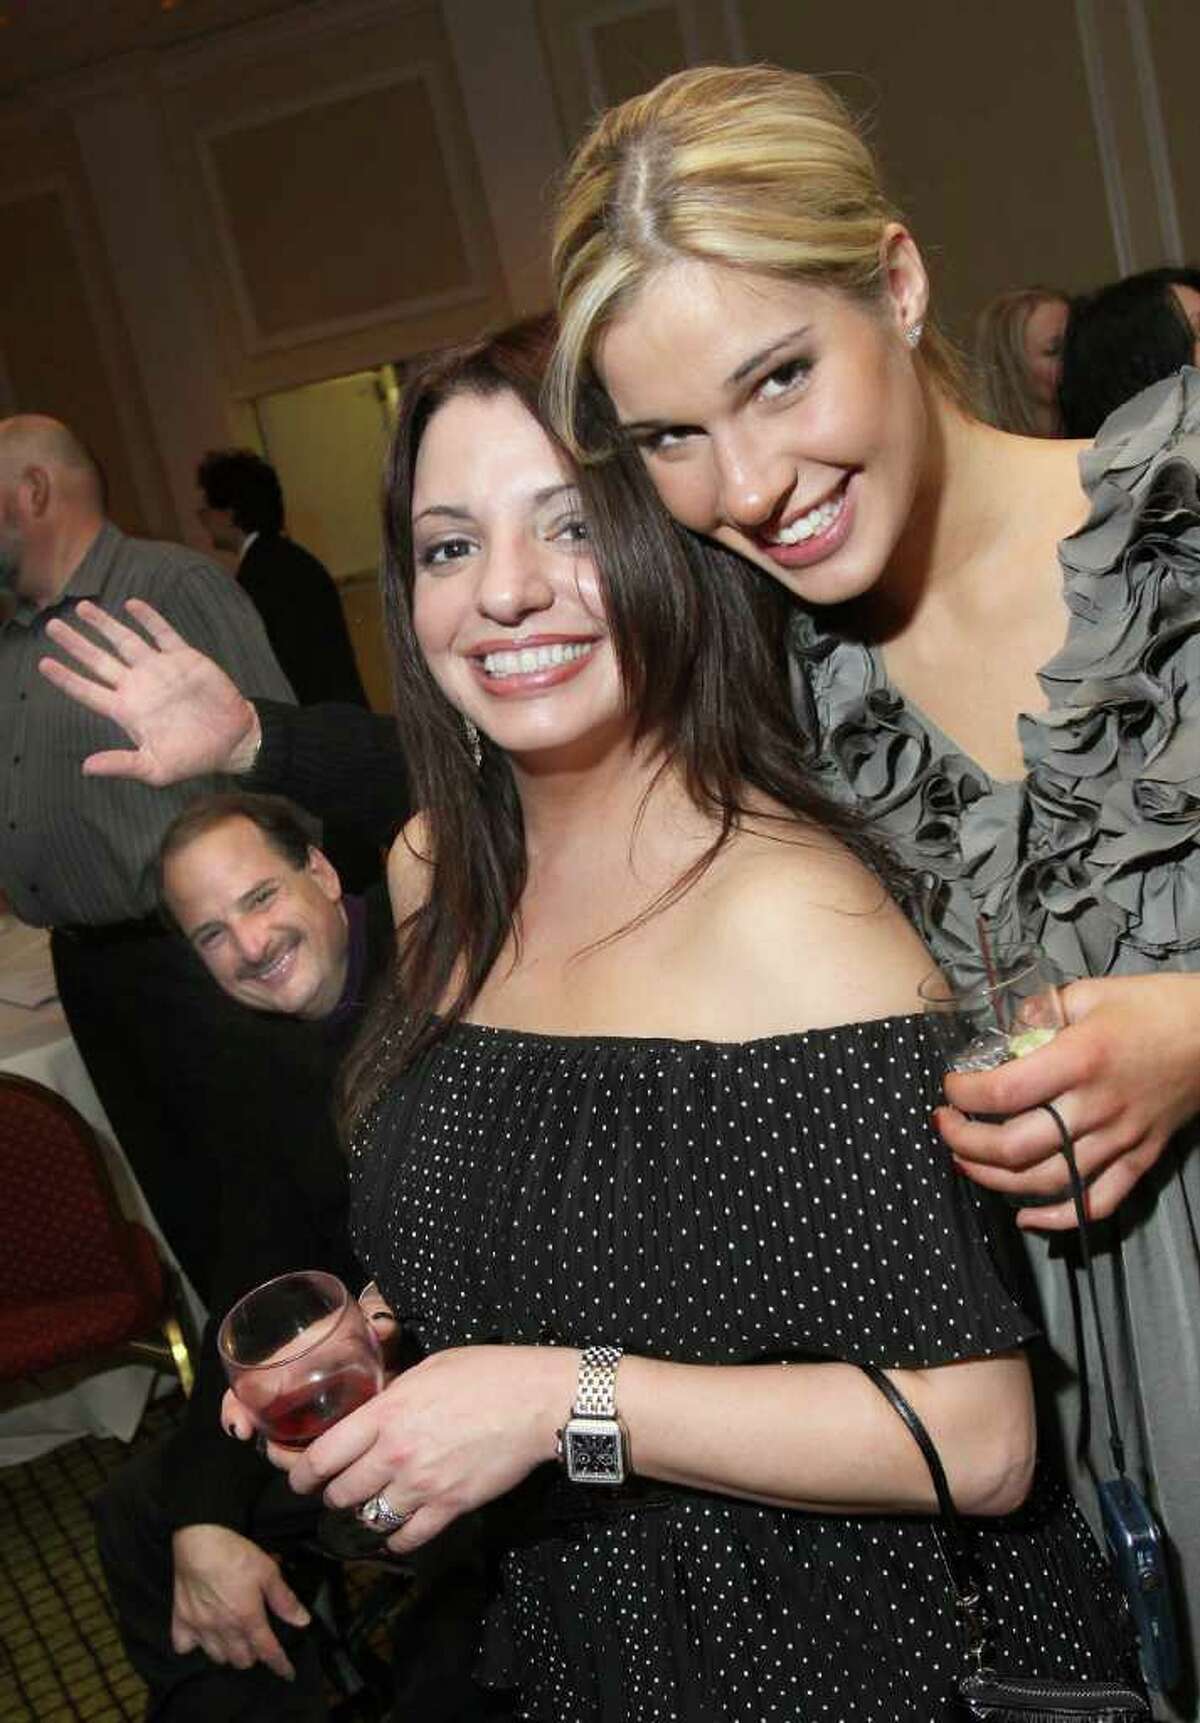 Diana Garcia, center, and Courtney Wojeski pose for a picture while their friend Dan Marko waves in the background, during Taste of Compassion, a Jan. 28, 2011, wine tasting event to benefit the Leukemia & Lymphoma Society Upstate New York/Vermont Chapter. (Joe Putrock / Special to the Times Union)